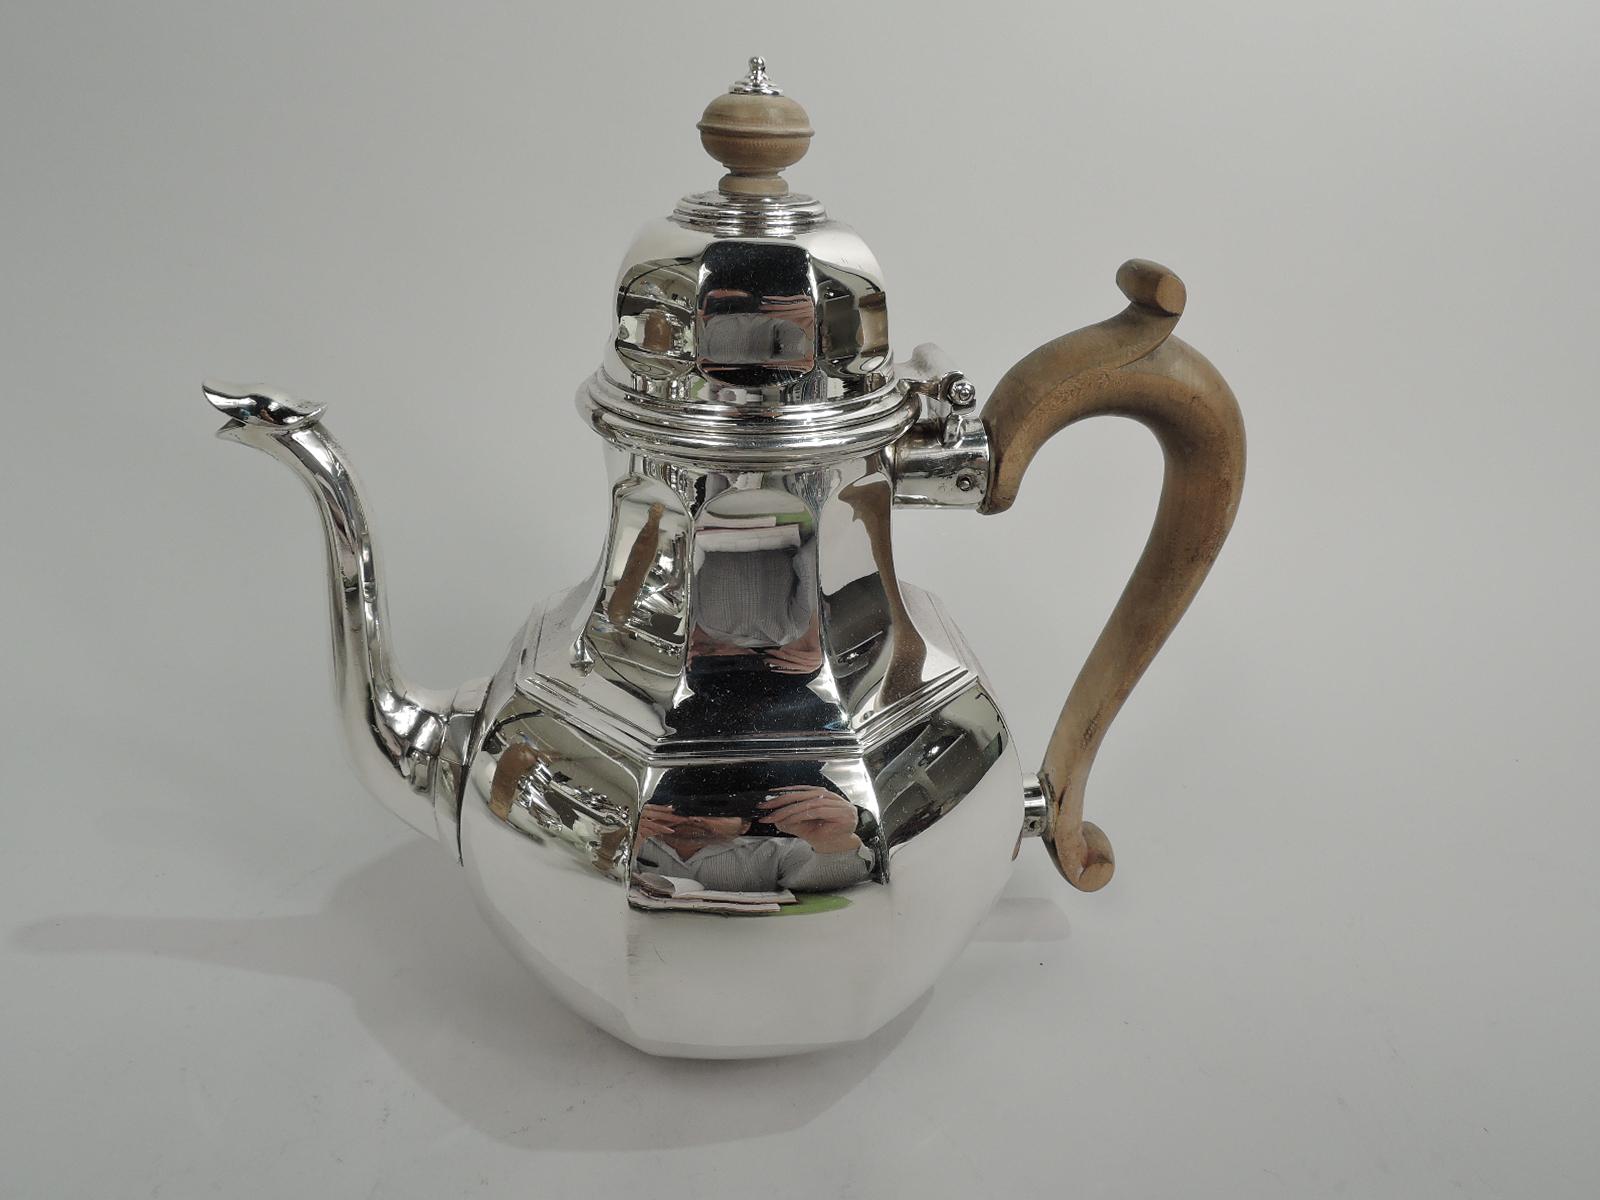 English Georgian silver coffee & tea set, 1919. This set comprises 4 pieces: Coffeepot, teapot, hot milk jug, and creamer. Faceted and globular bodies. Capped and s-scroll stained-wood handles. Covers hinged and domed with stained-wood and silver